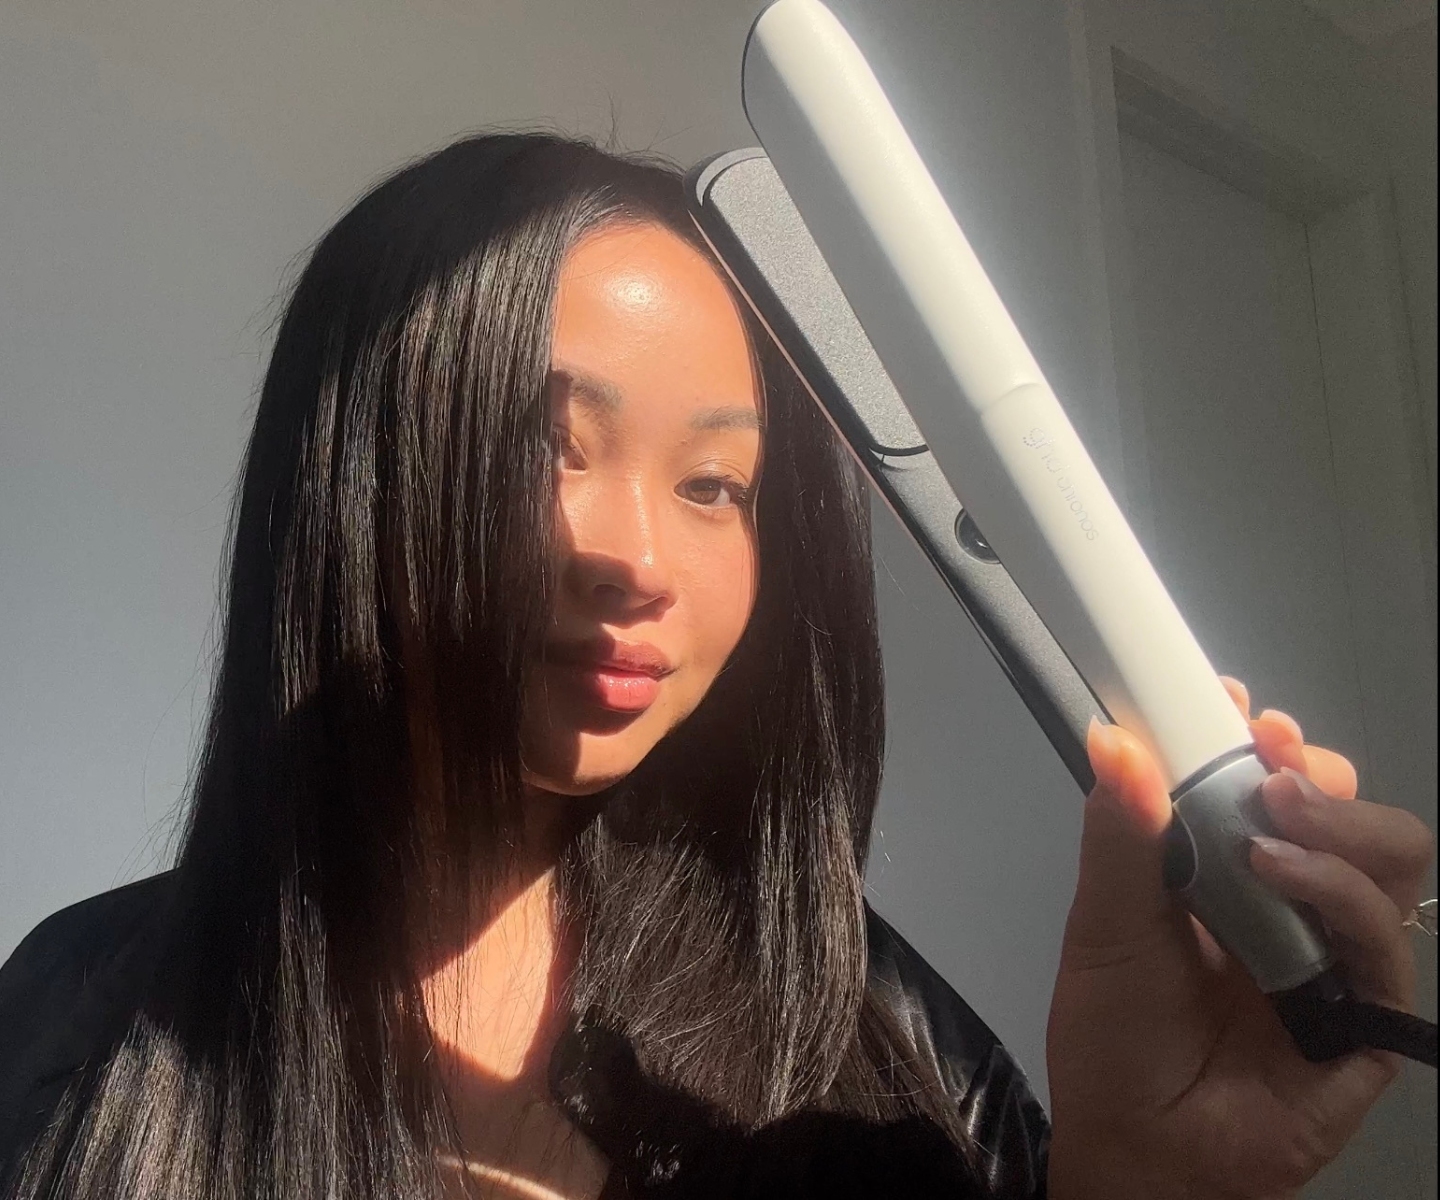 My Verdict on the New Ghd Chronos Styler That Promises to Style